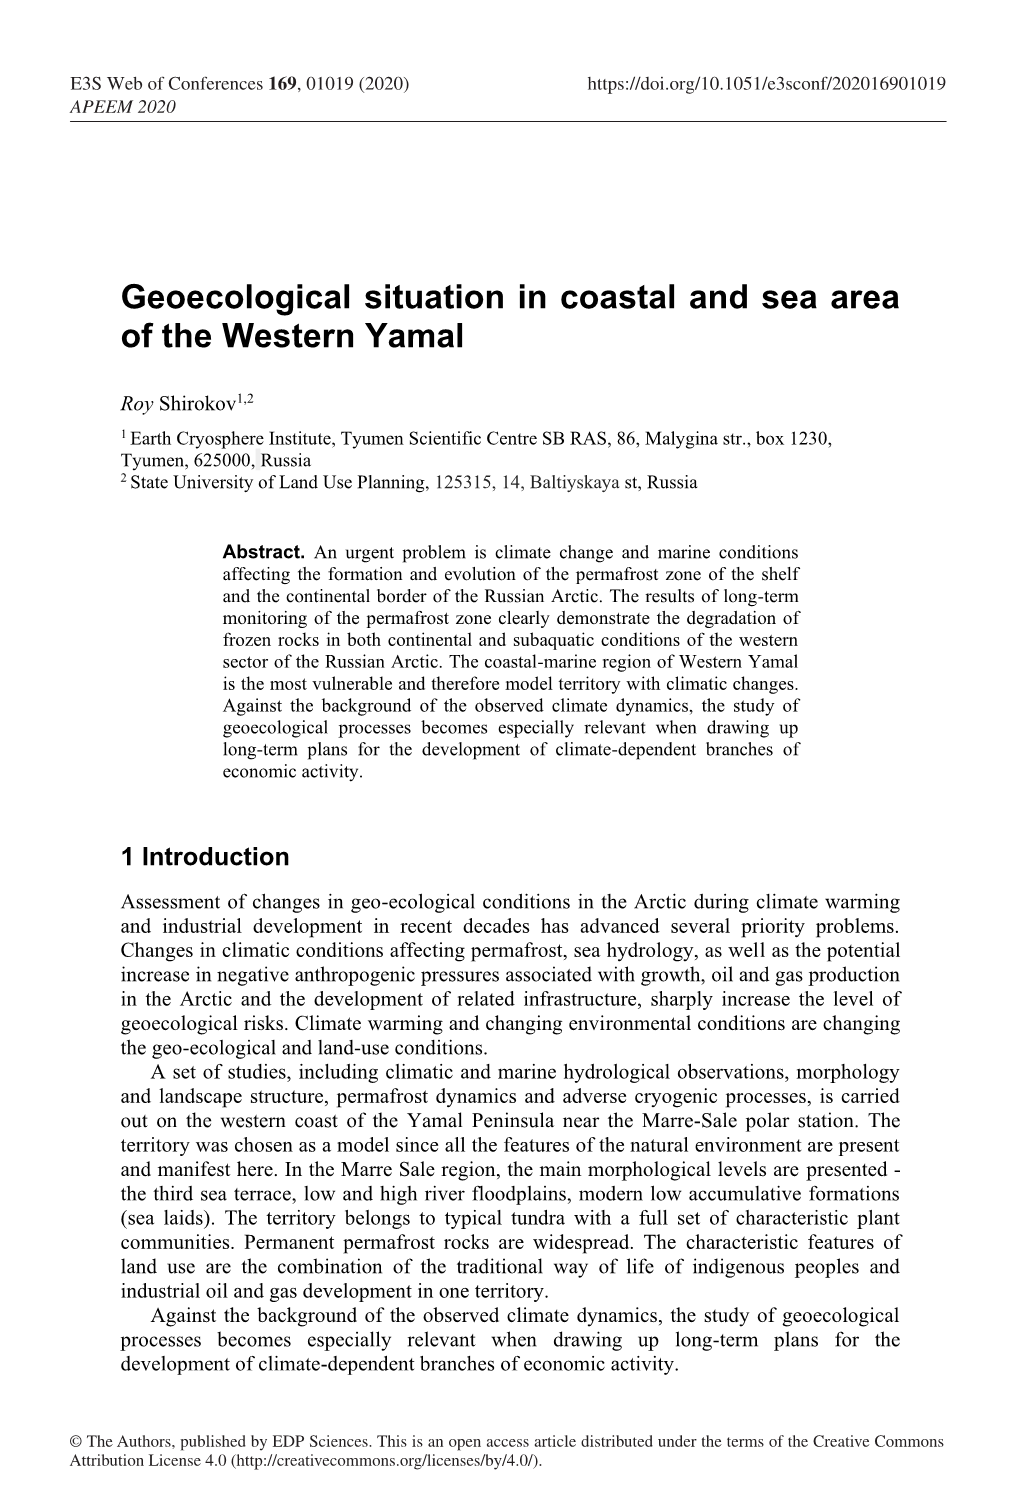 Geoecological Situation in Coastal and Sea Area of the Western Yamal